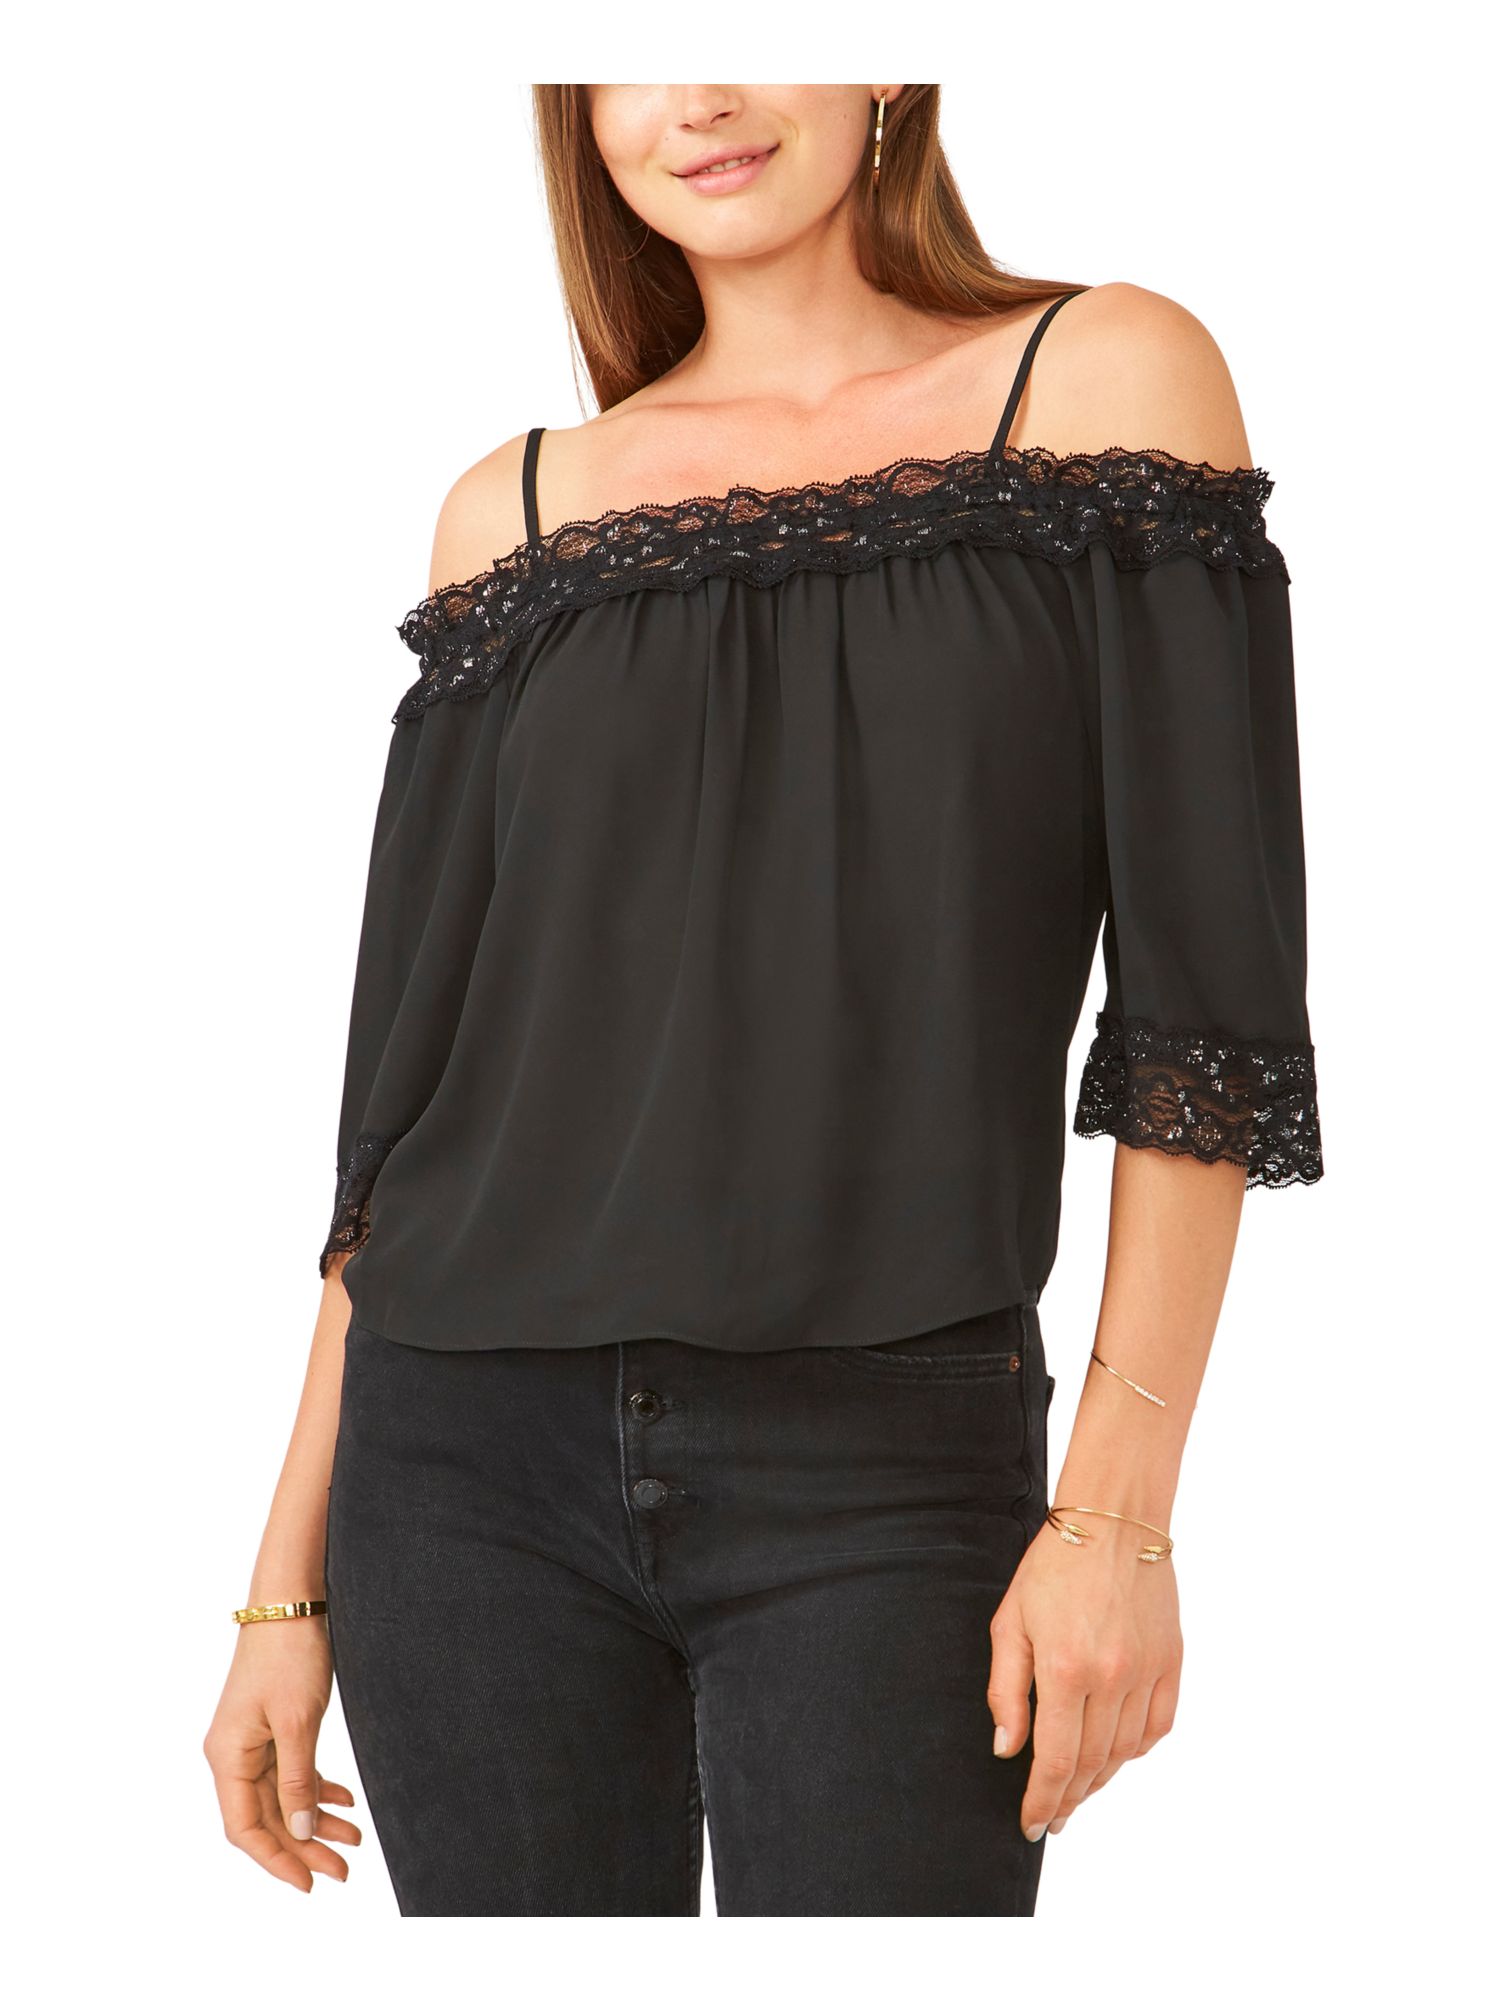 28TH & PARK Womens Black Ruffled Short Length Elbow Sleeve Spaghetti Strap Off Shoulder Party Top Juniors S